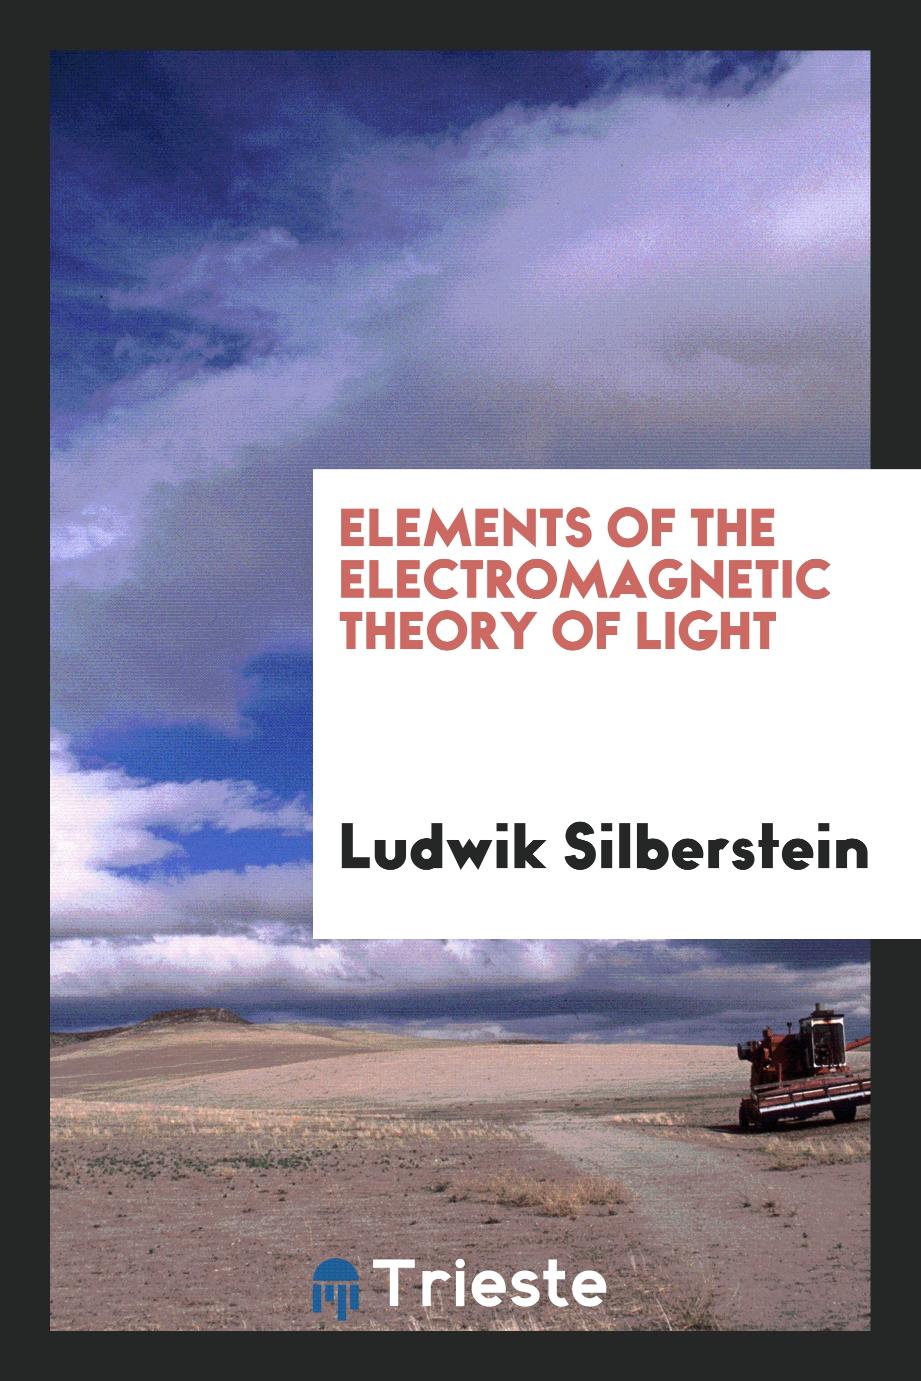 Elements of the electromagnetic theory of light